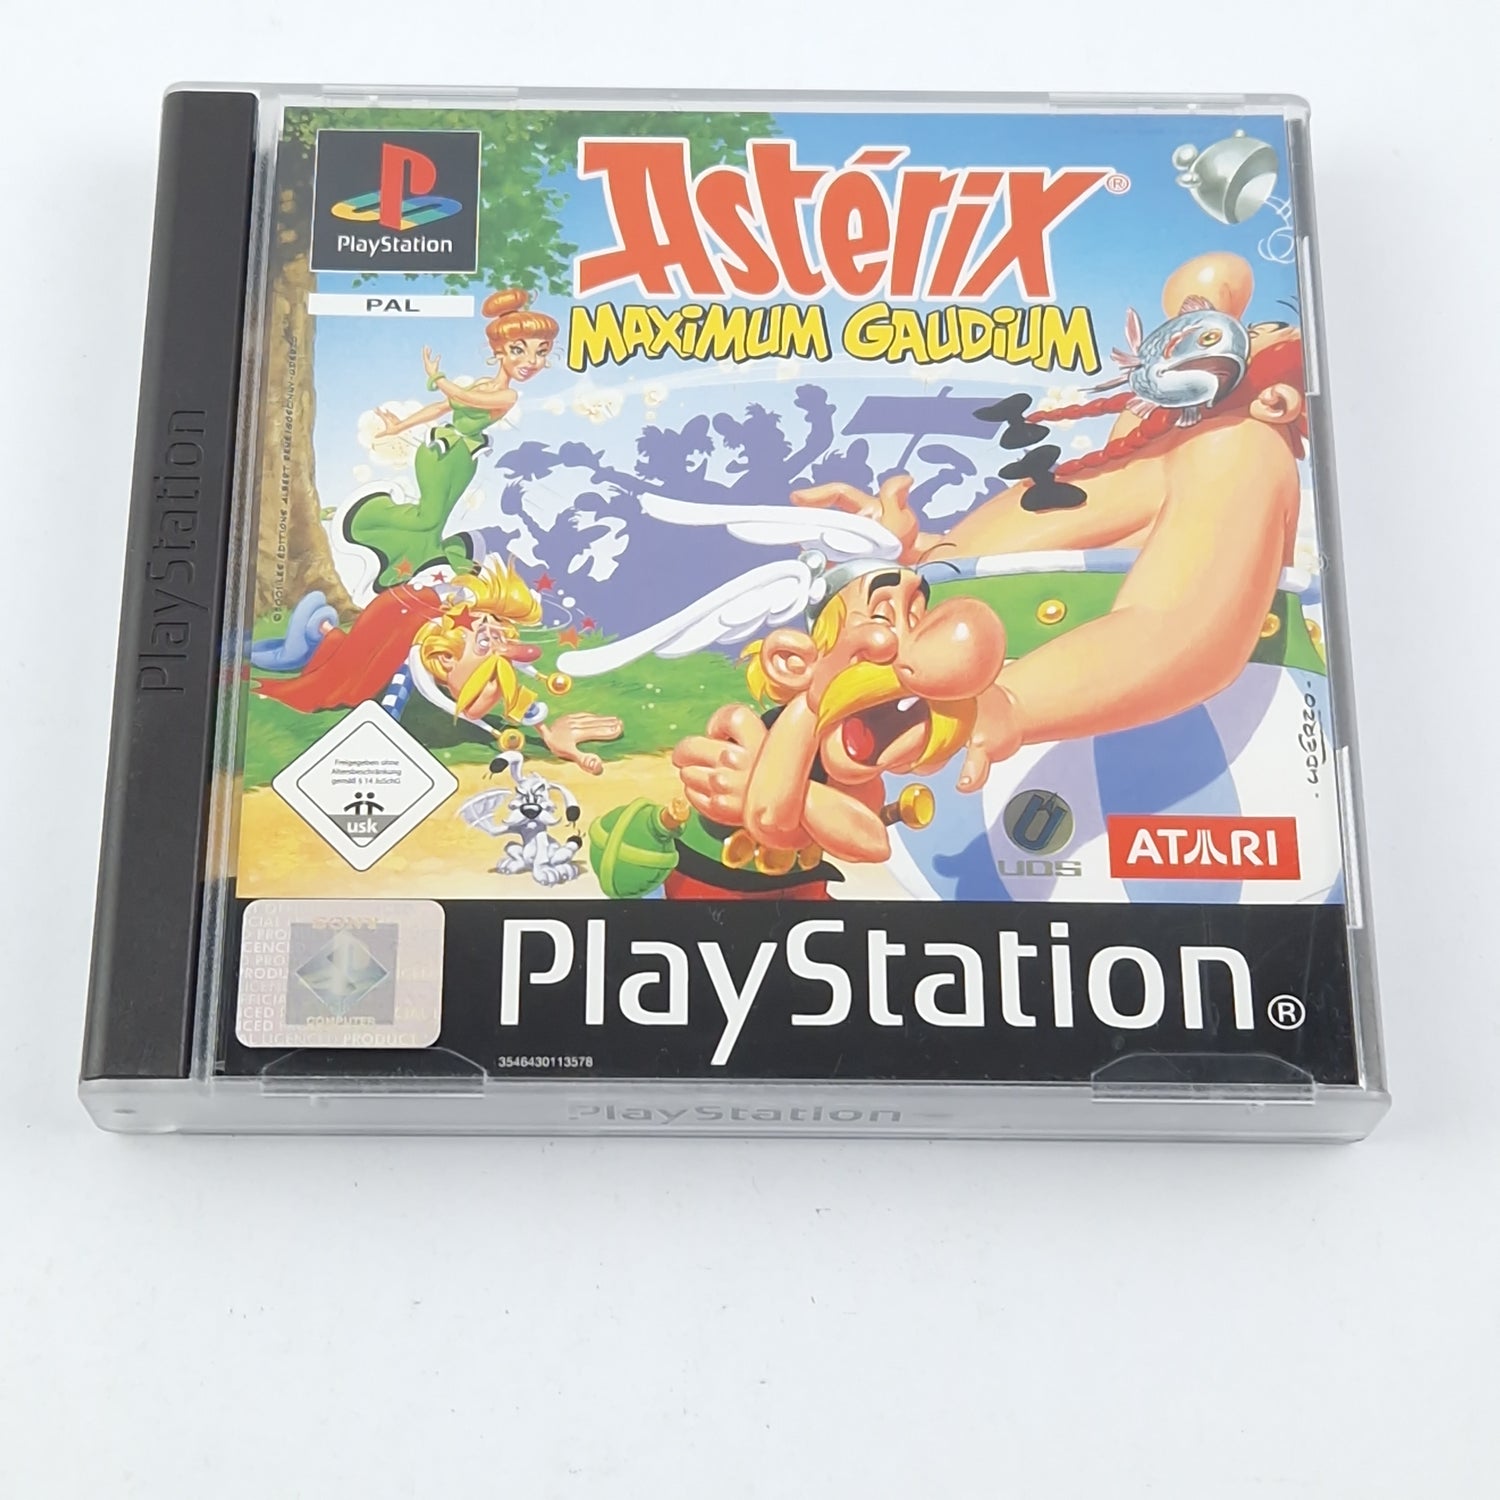 Playstation 1 game: Asterix Maximum Gaudium - CD instructions OVP / SONY PS1 PAL